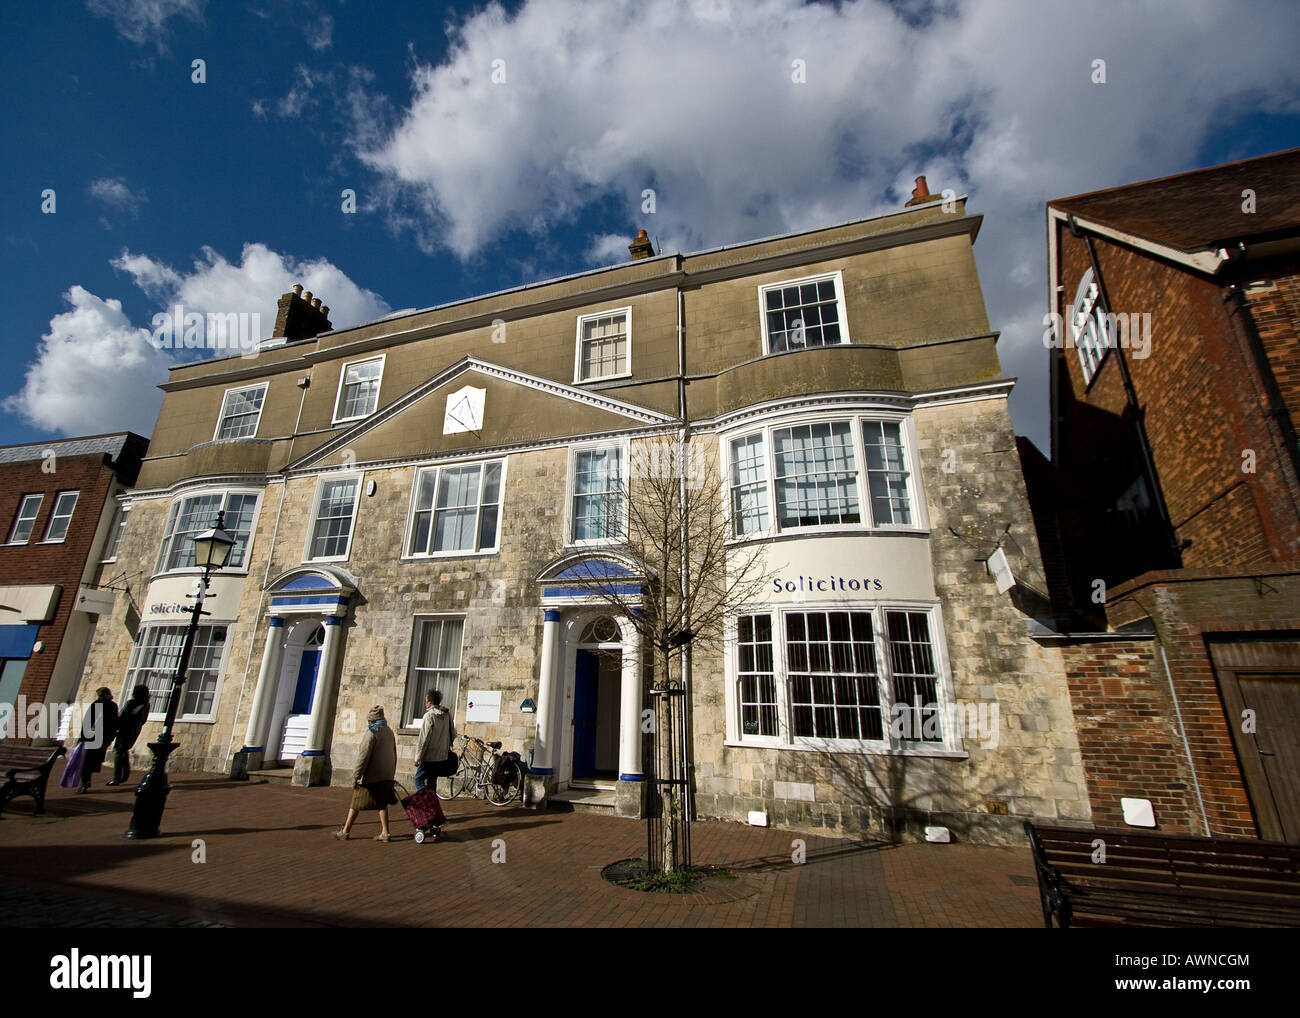 wideangle view of building in cliffe high street, lewes with sundial and shoppers Stock Photo